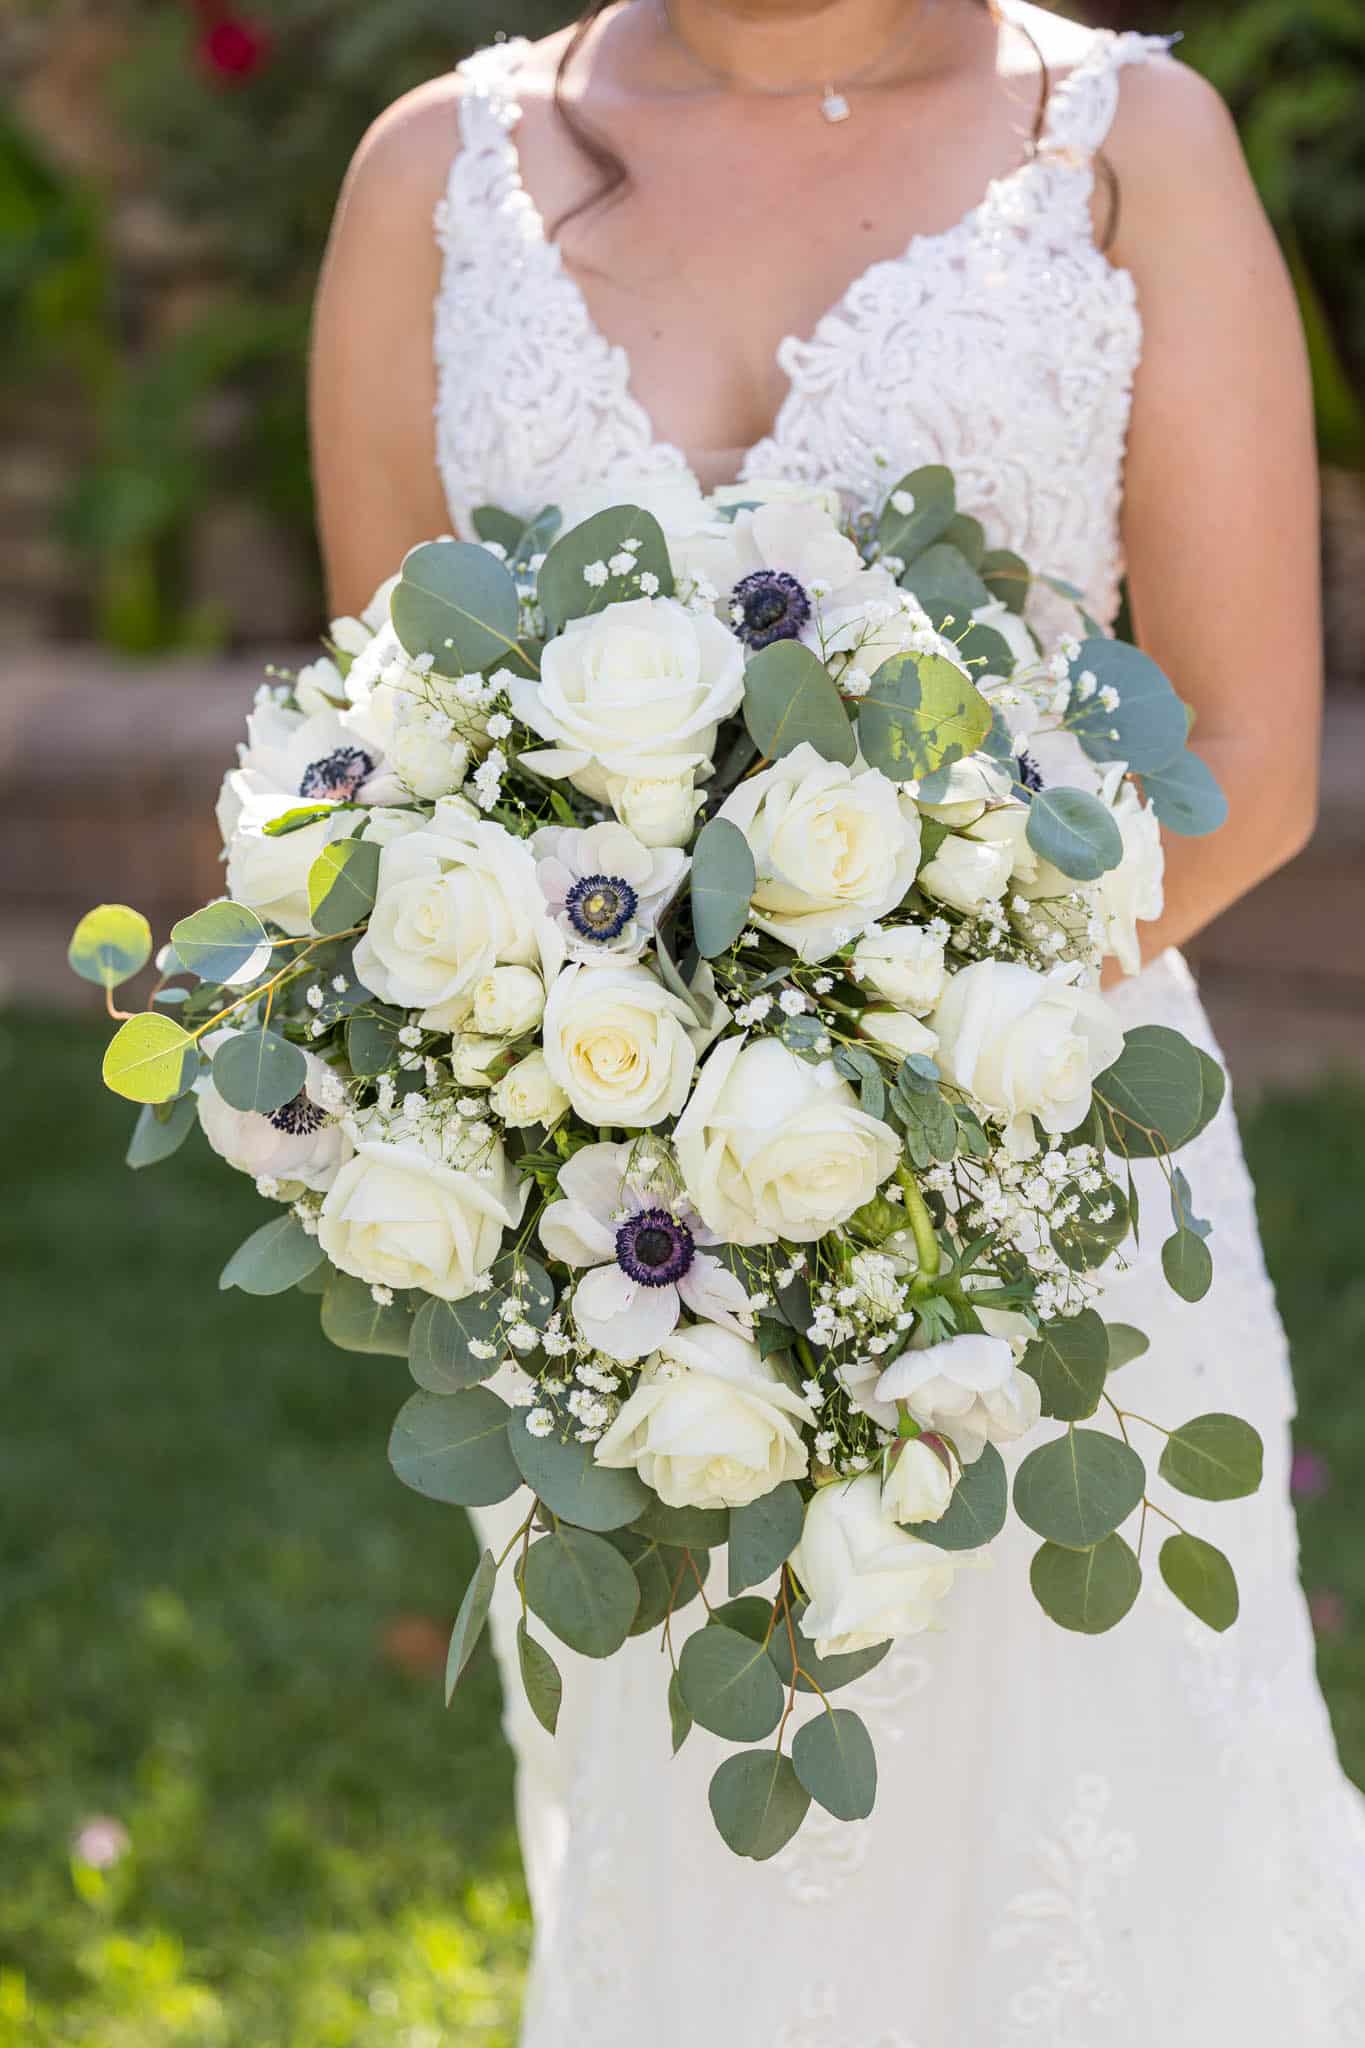 Ventura wedding photographer captures detail shot of bride's wedding bouquet with white roses and large eucalyptus leaves